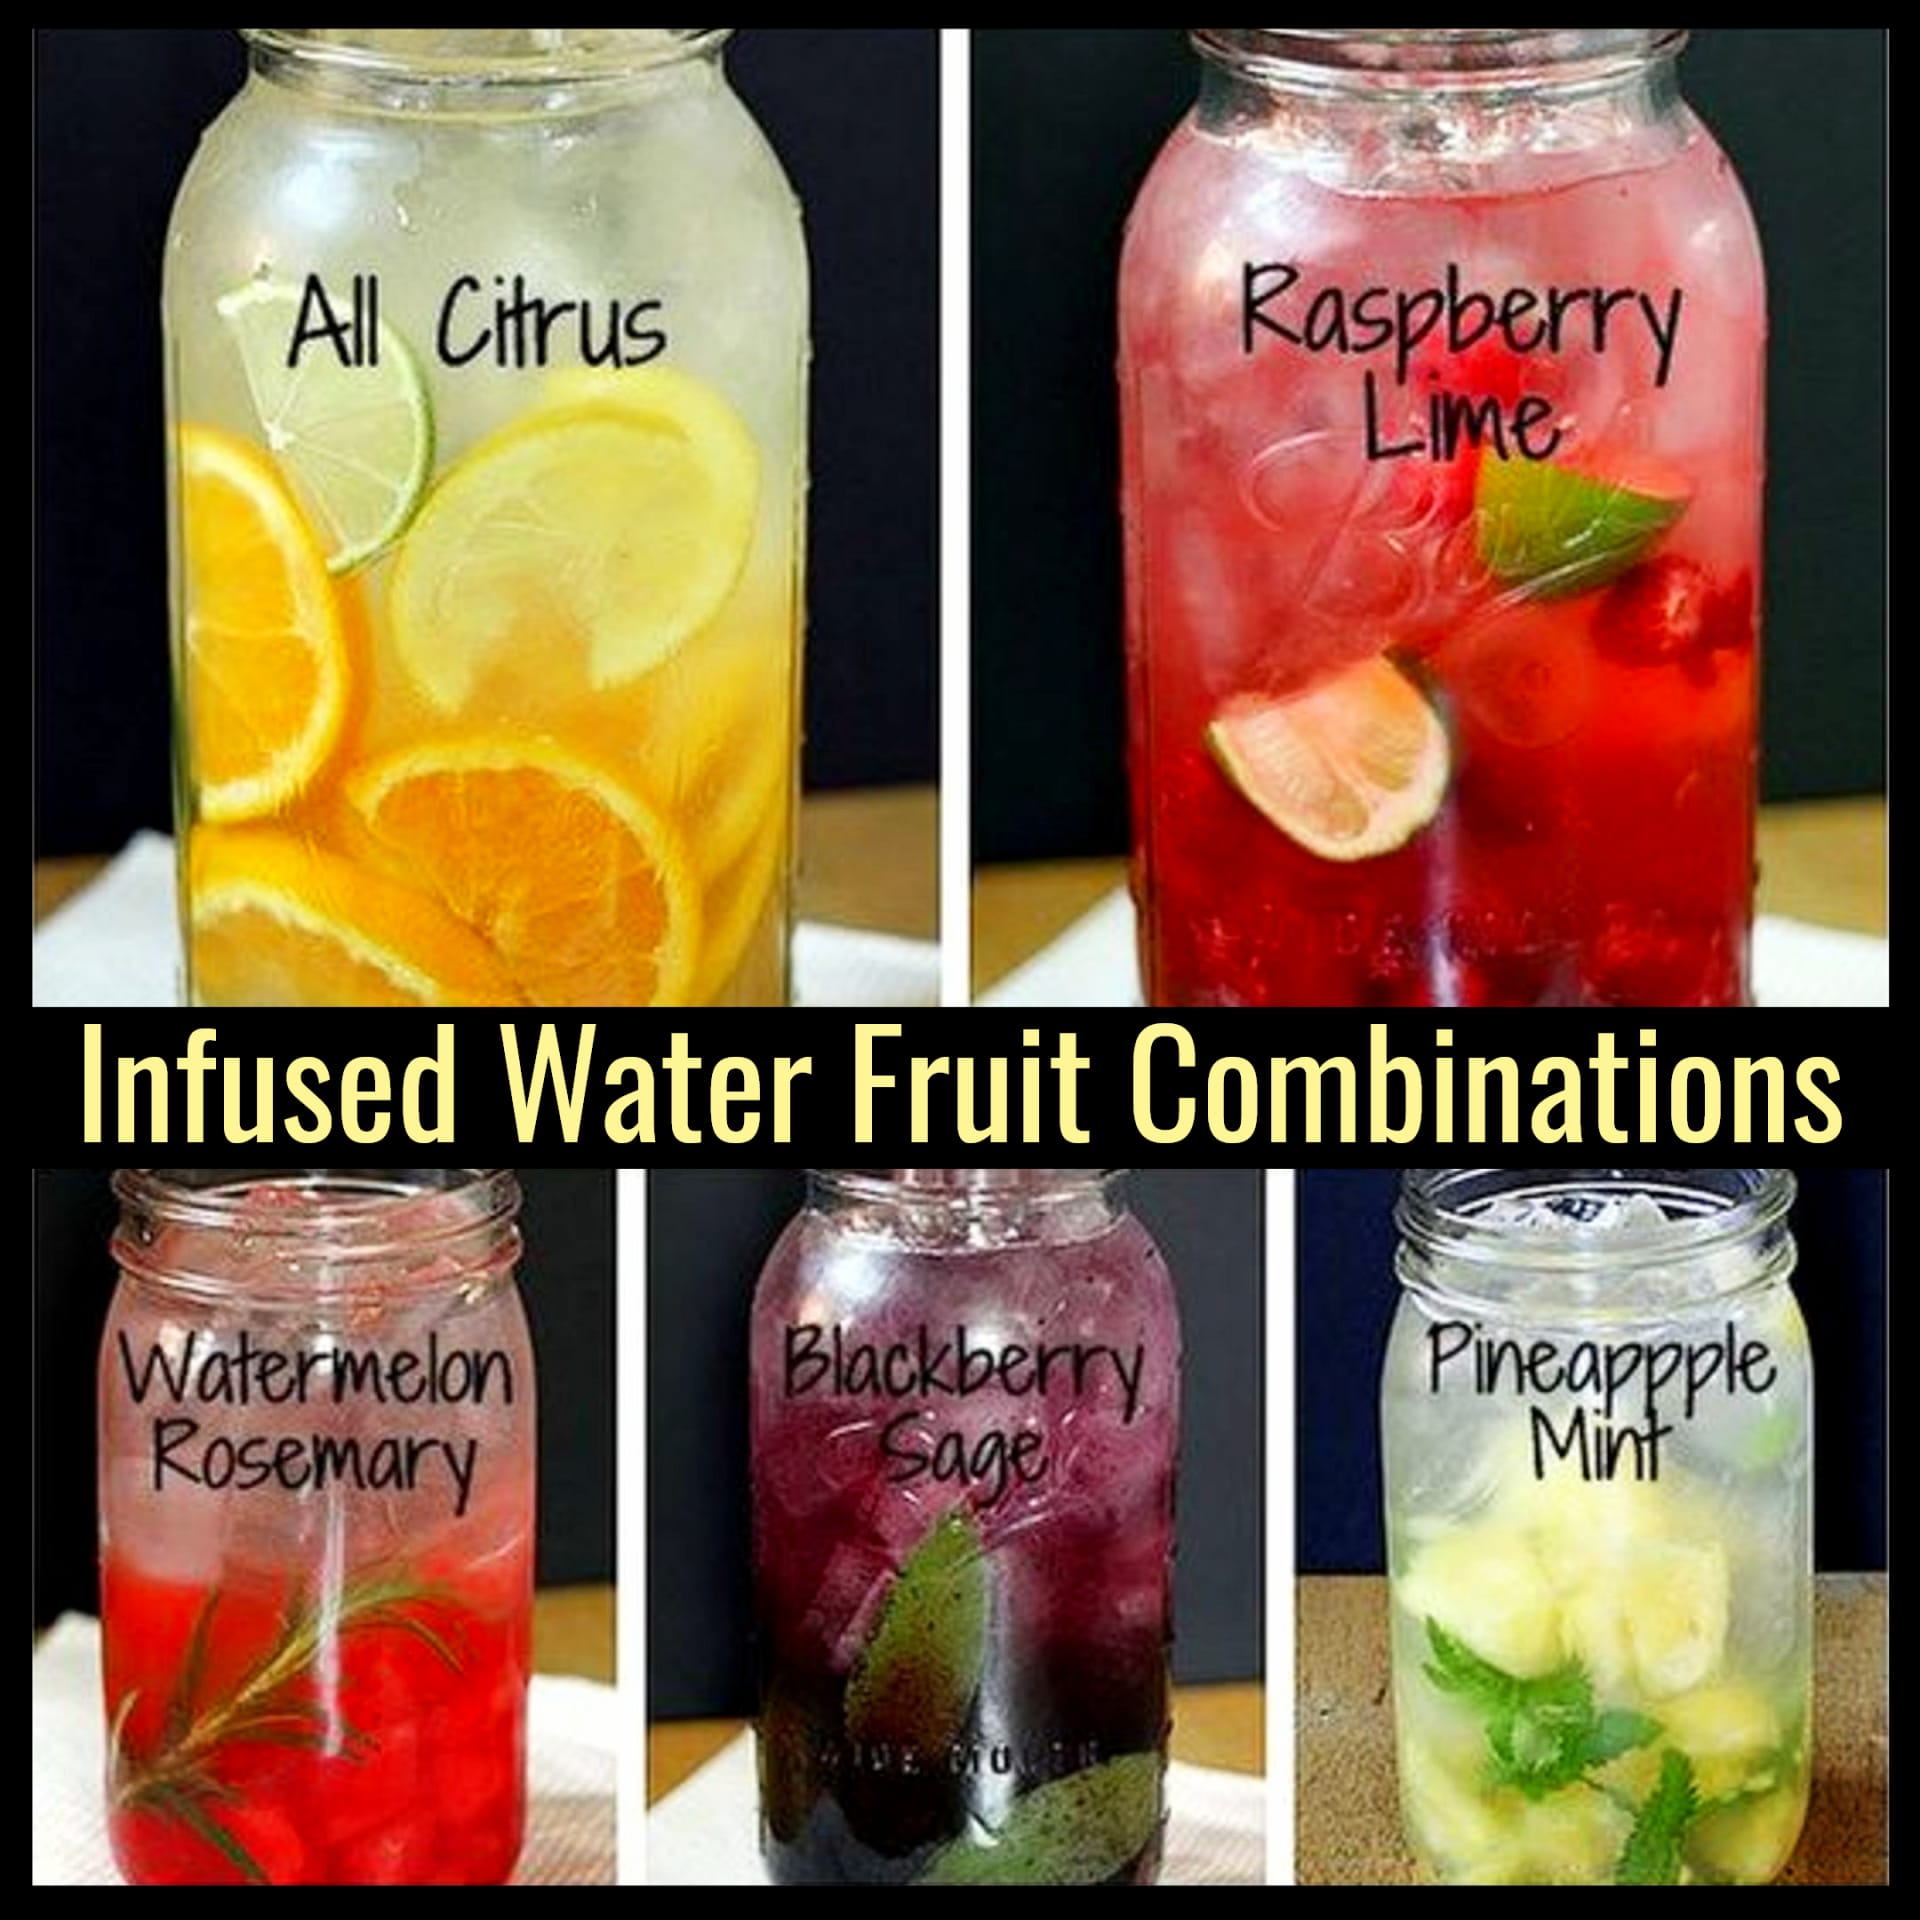 Best Infused Water Recipes and fruit infused water combinations - How to make infused water for weight loss, for skin, for energy or a flat belly - these healthy detox infused water recipes have so many health benefits - especially the vegetable and fruit infused water recipes